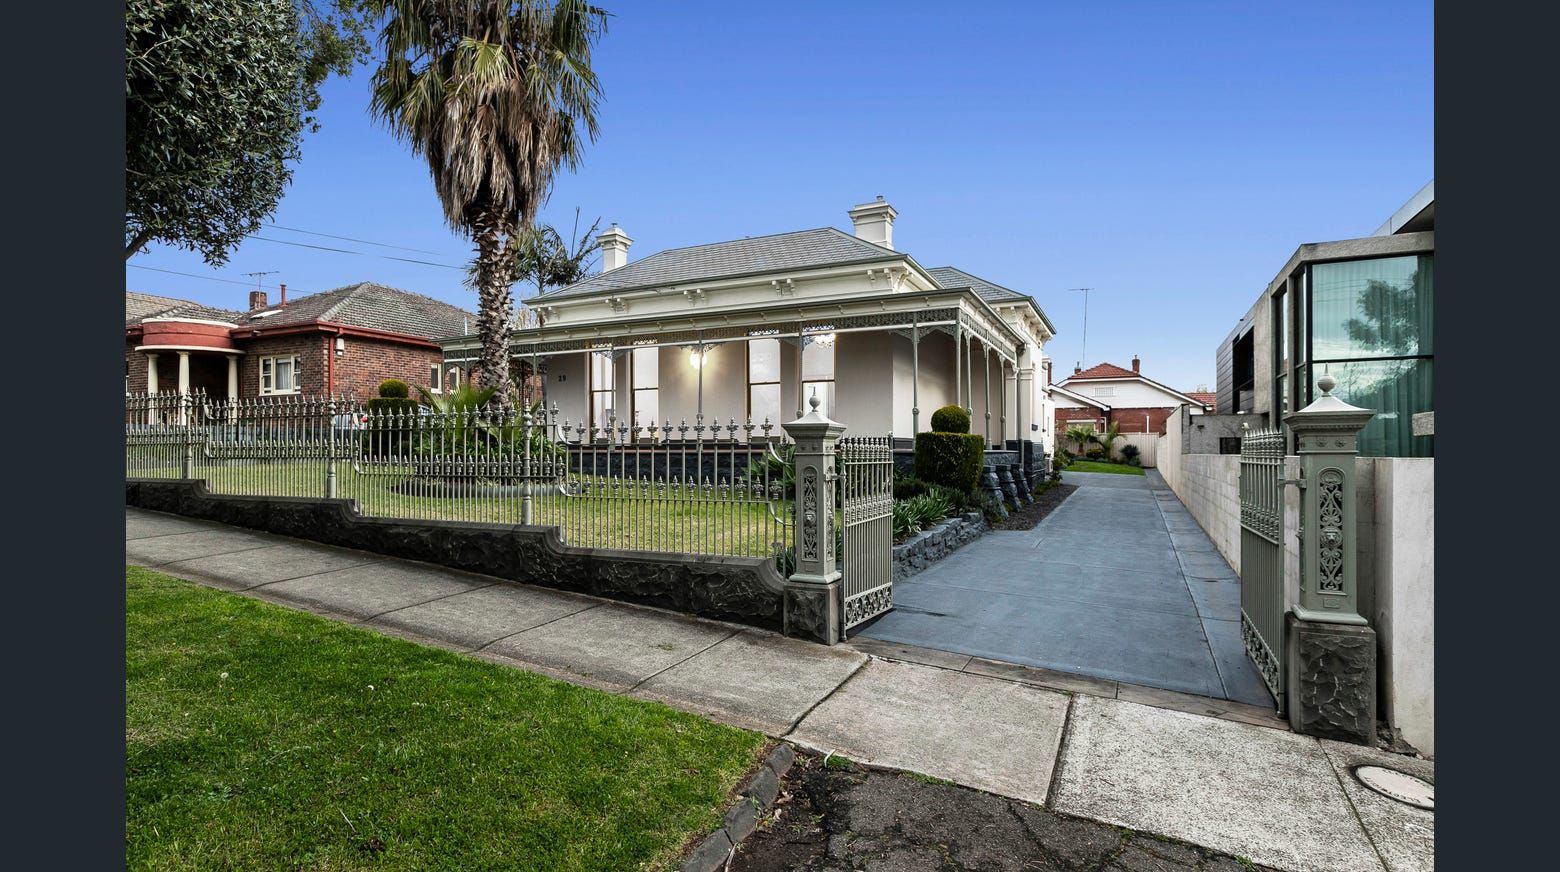 5 bedrooms House in 29 St Leonards Road ASCOT VALE VIC, 3032